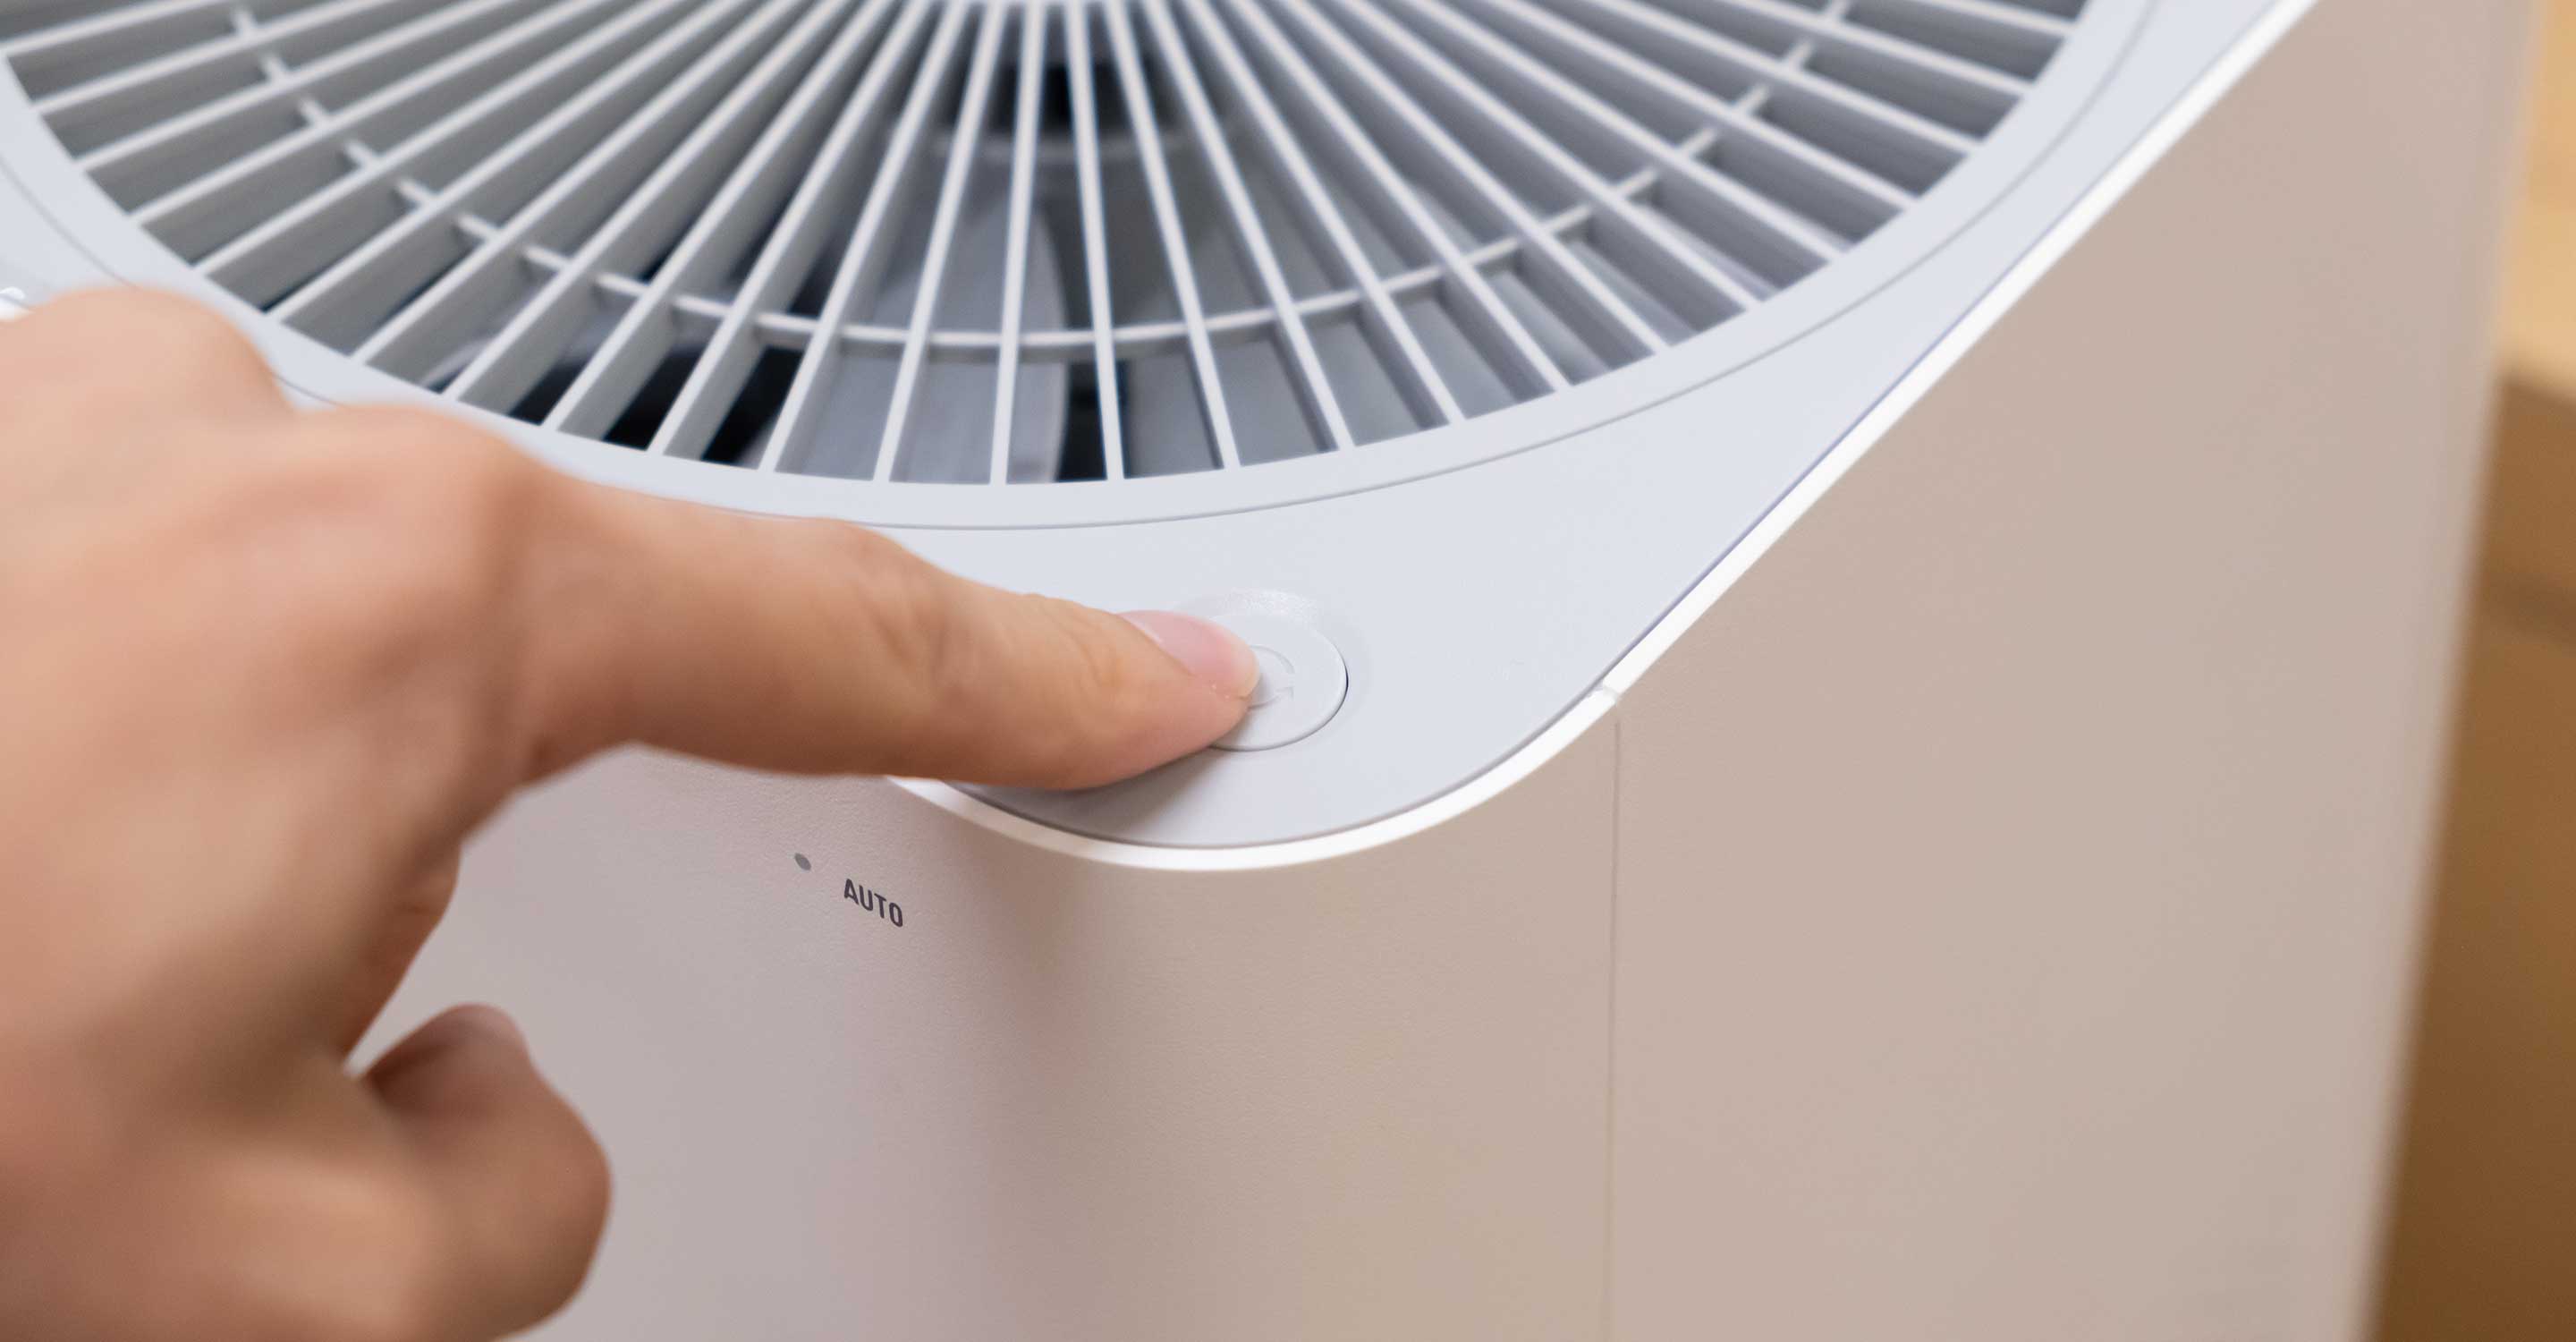 Ozone Air Purifier: Separating Myths and Facts